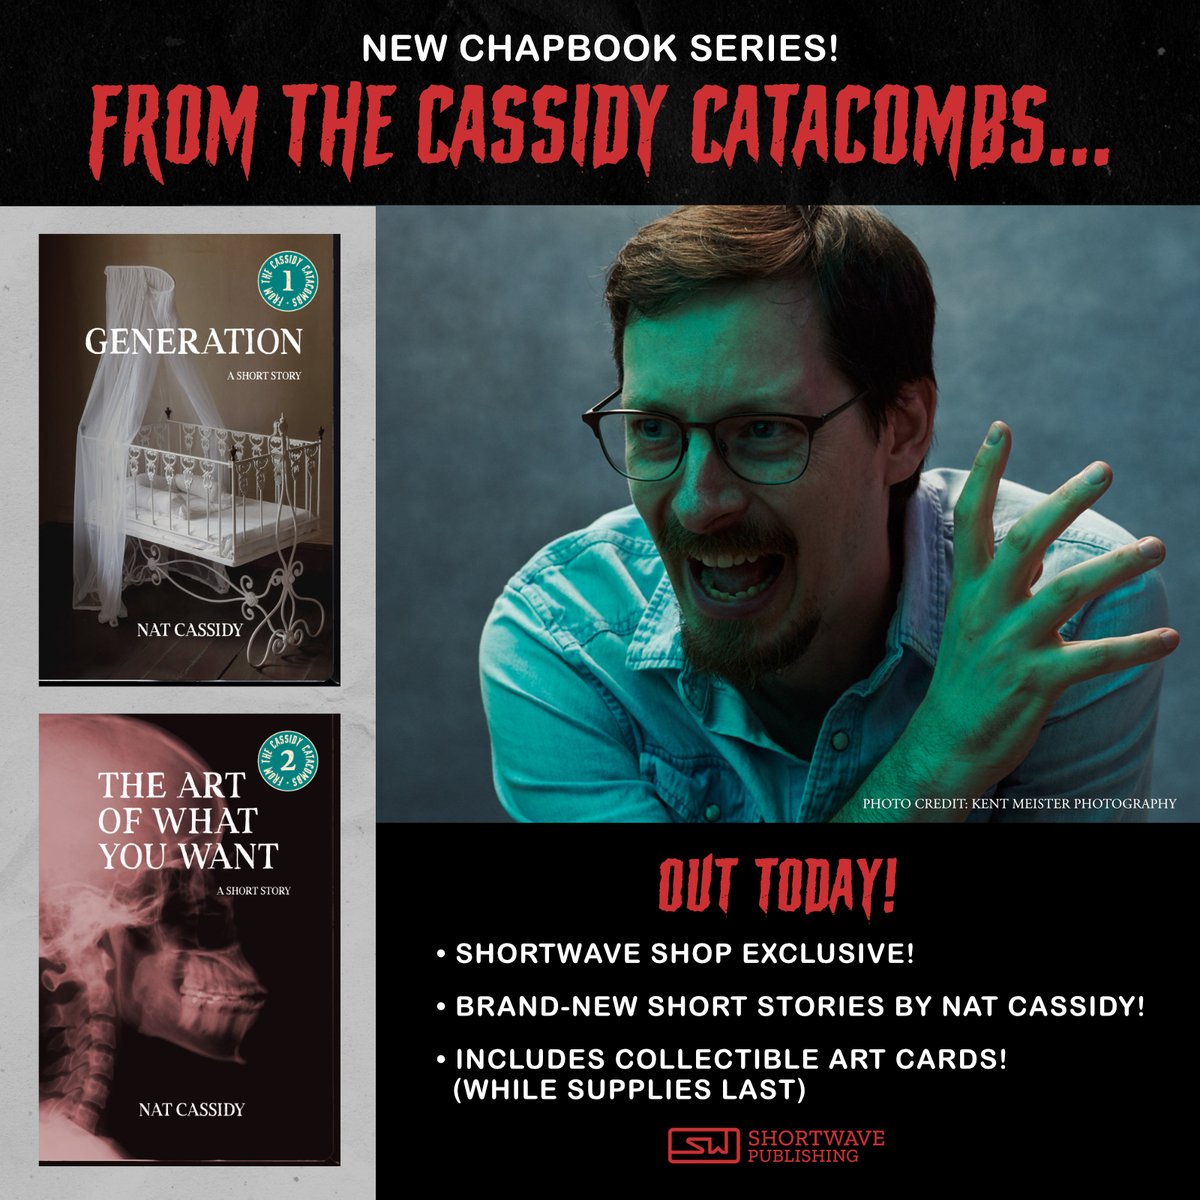 Today is the release day for a few new short stories by a horror icon. A legend! I look forward to each and every one of his new releases, and today's stories are no exception. I'm speaking of Stephen King, of course, but we're also dropping some new @natcassidy stories today...